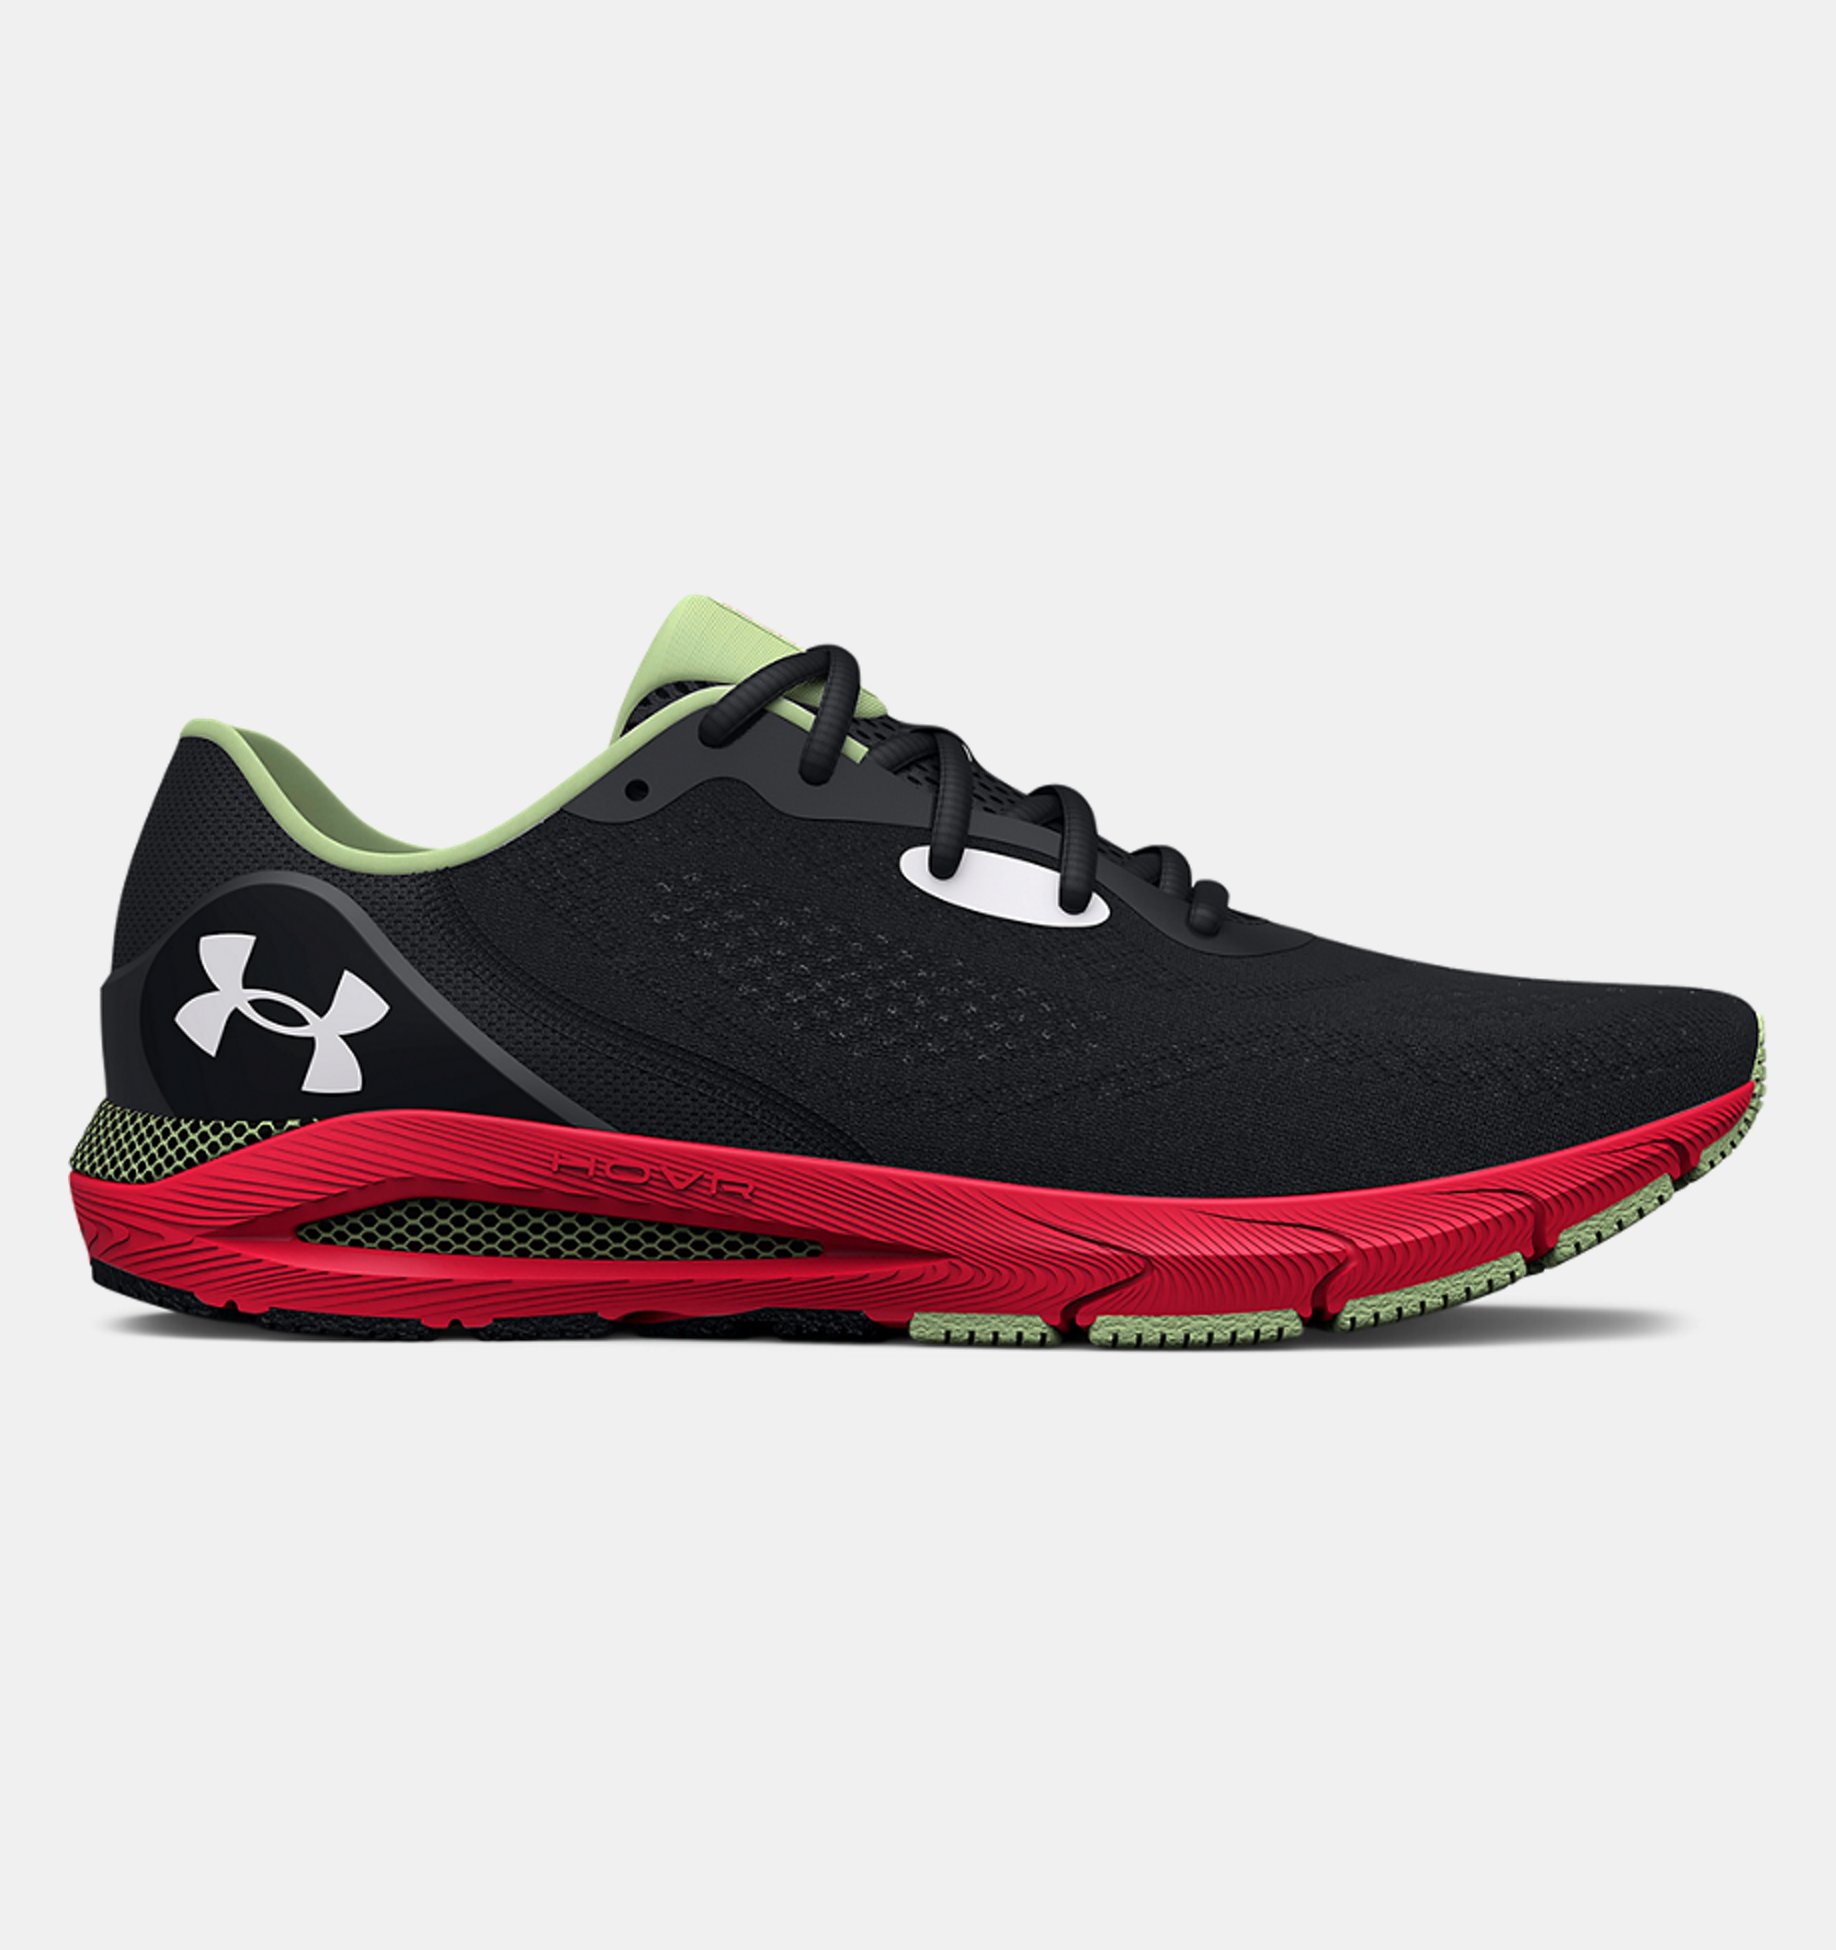 Under Armour Mens HOVR Sonic Basketball Shoe 